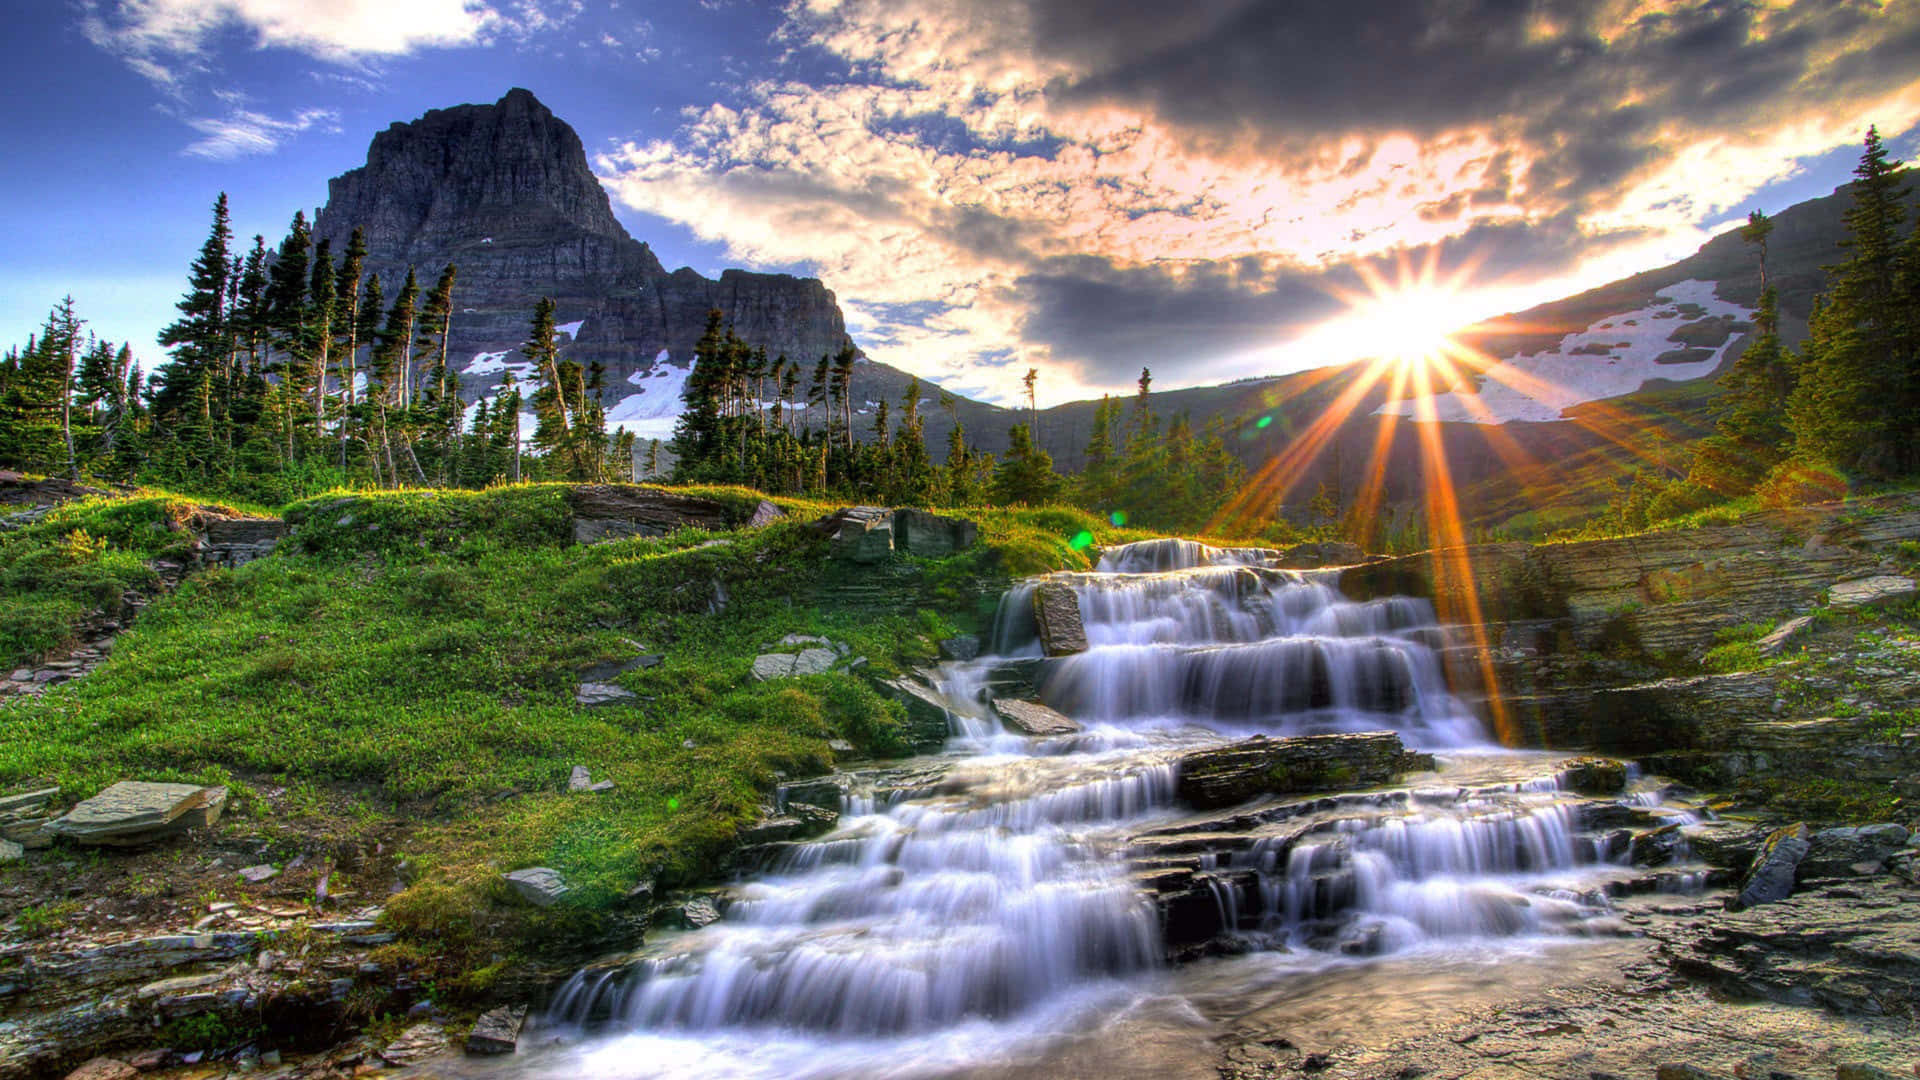 A Waterfall In The Mountains Wallpaper